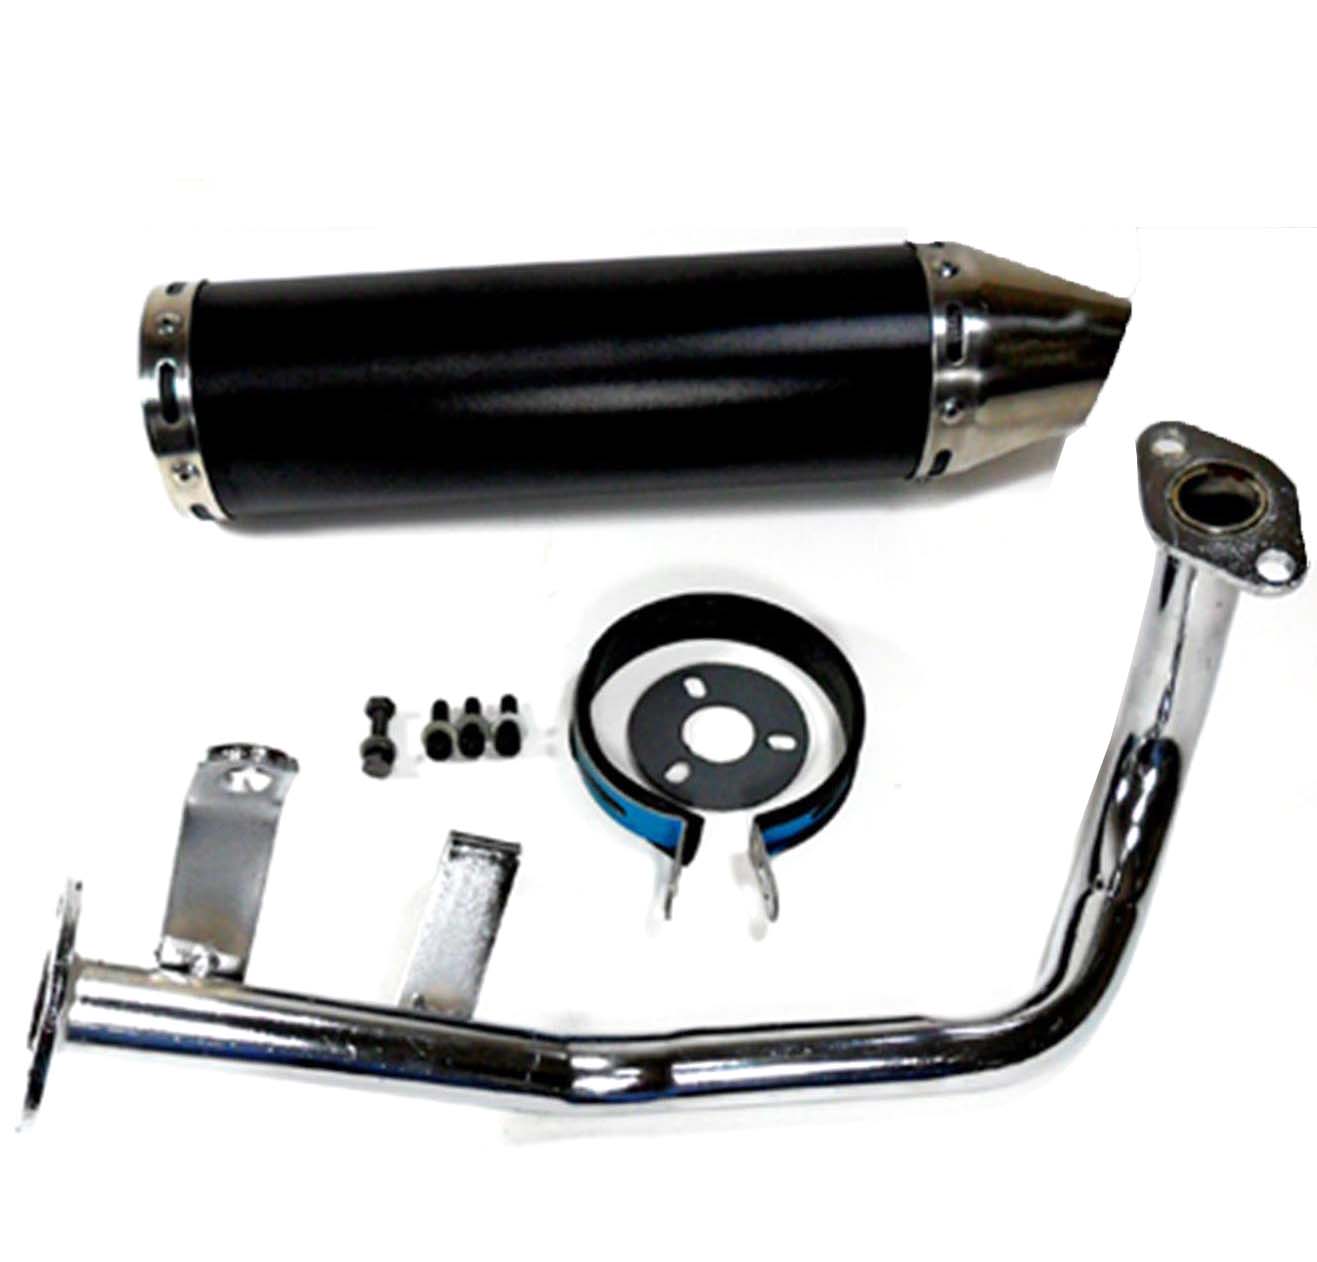 Exhaust Pipe HIGH PERFORMANCE BLACK/CHROME Fits Most GY6-50 QMB139 49cc Chinese Scooter Motors Canister L=300mm D=88mm - Click Image to Close